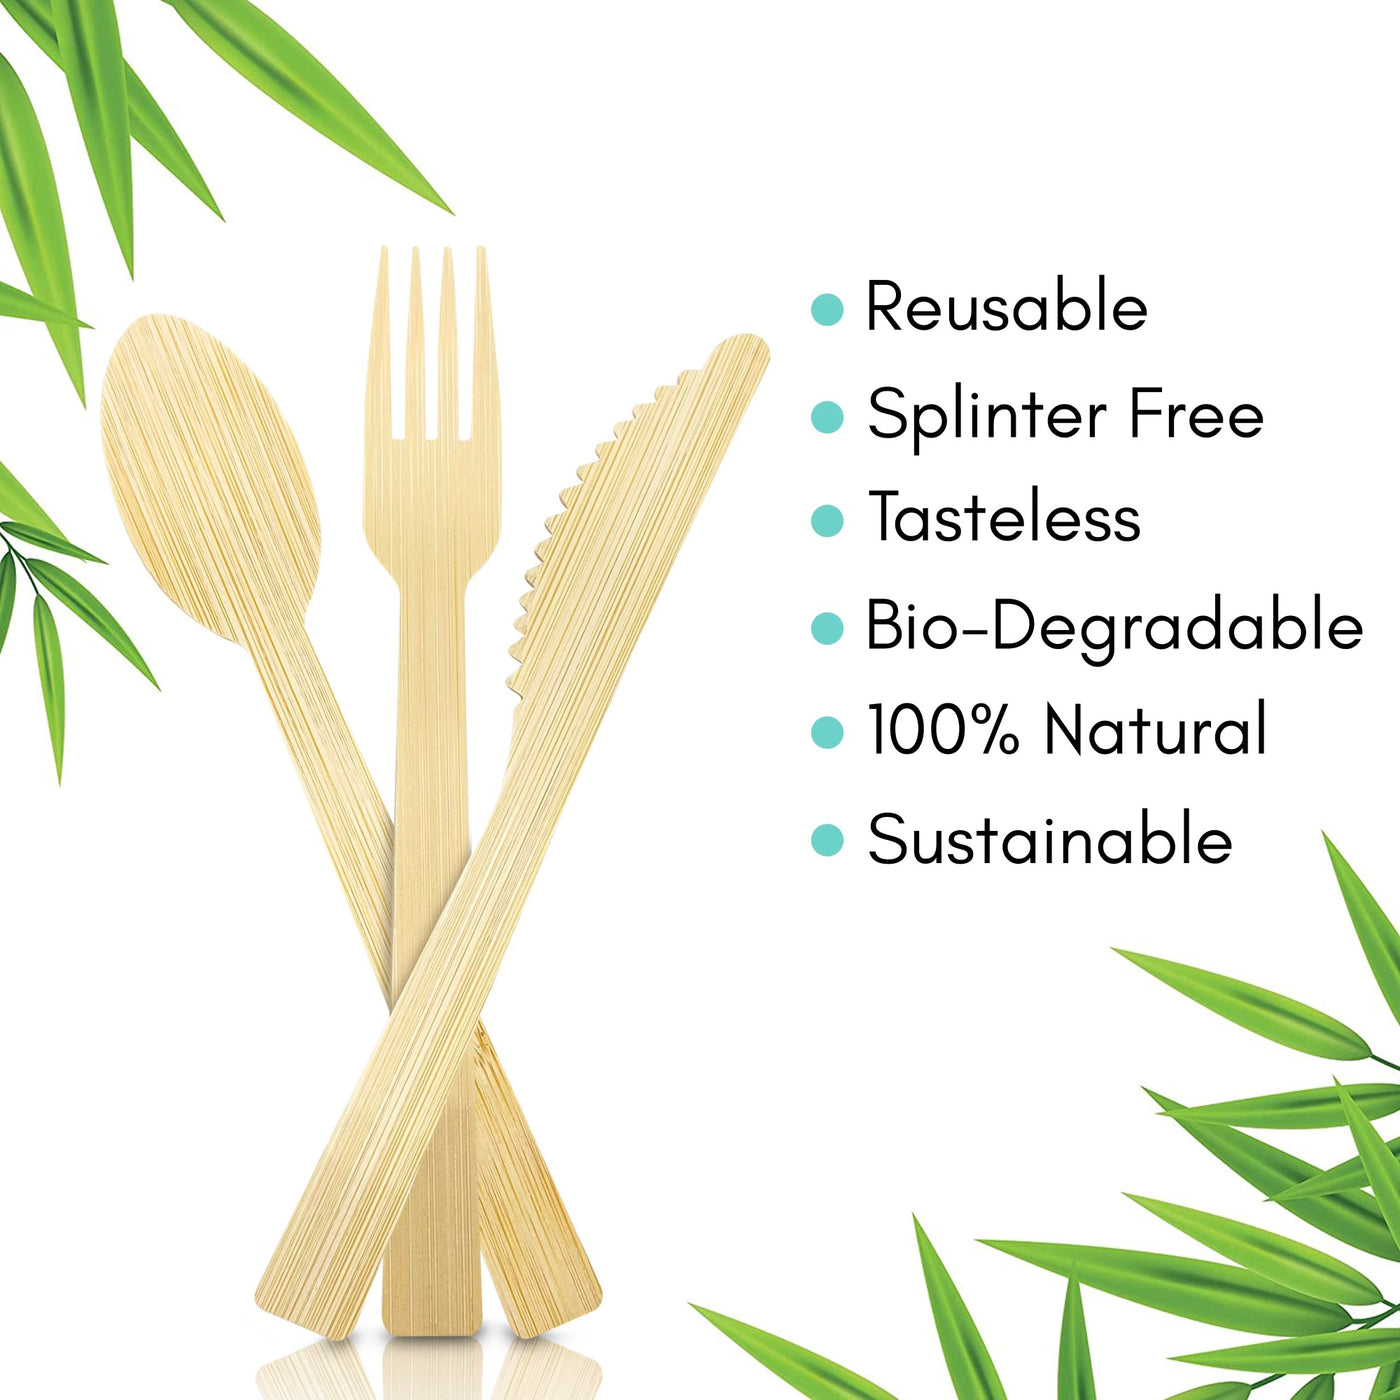 Bamboo Cutlery Sets, individually wrapped: 50 count